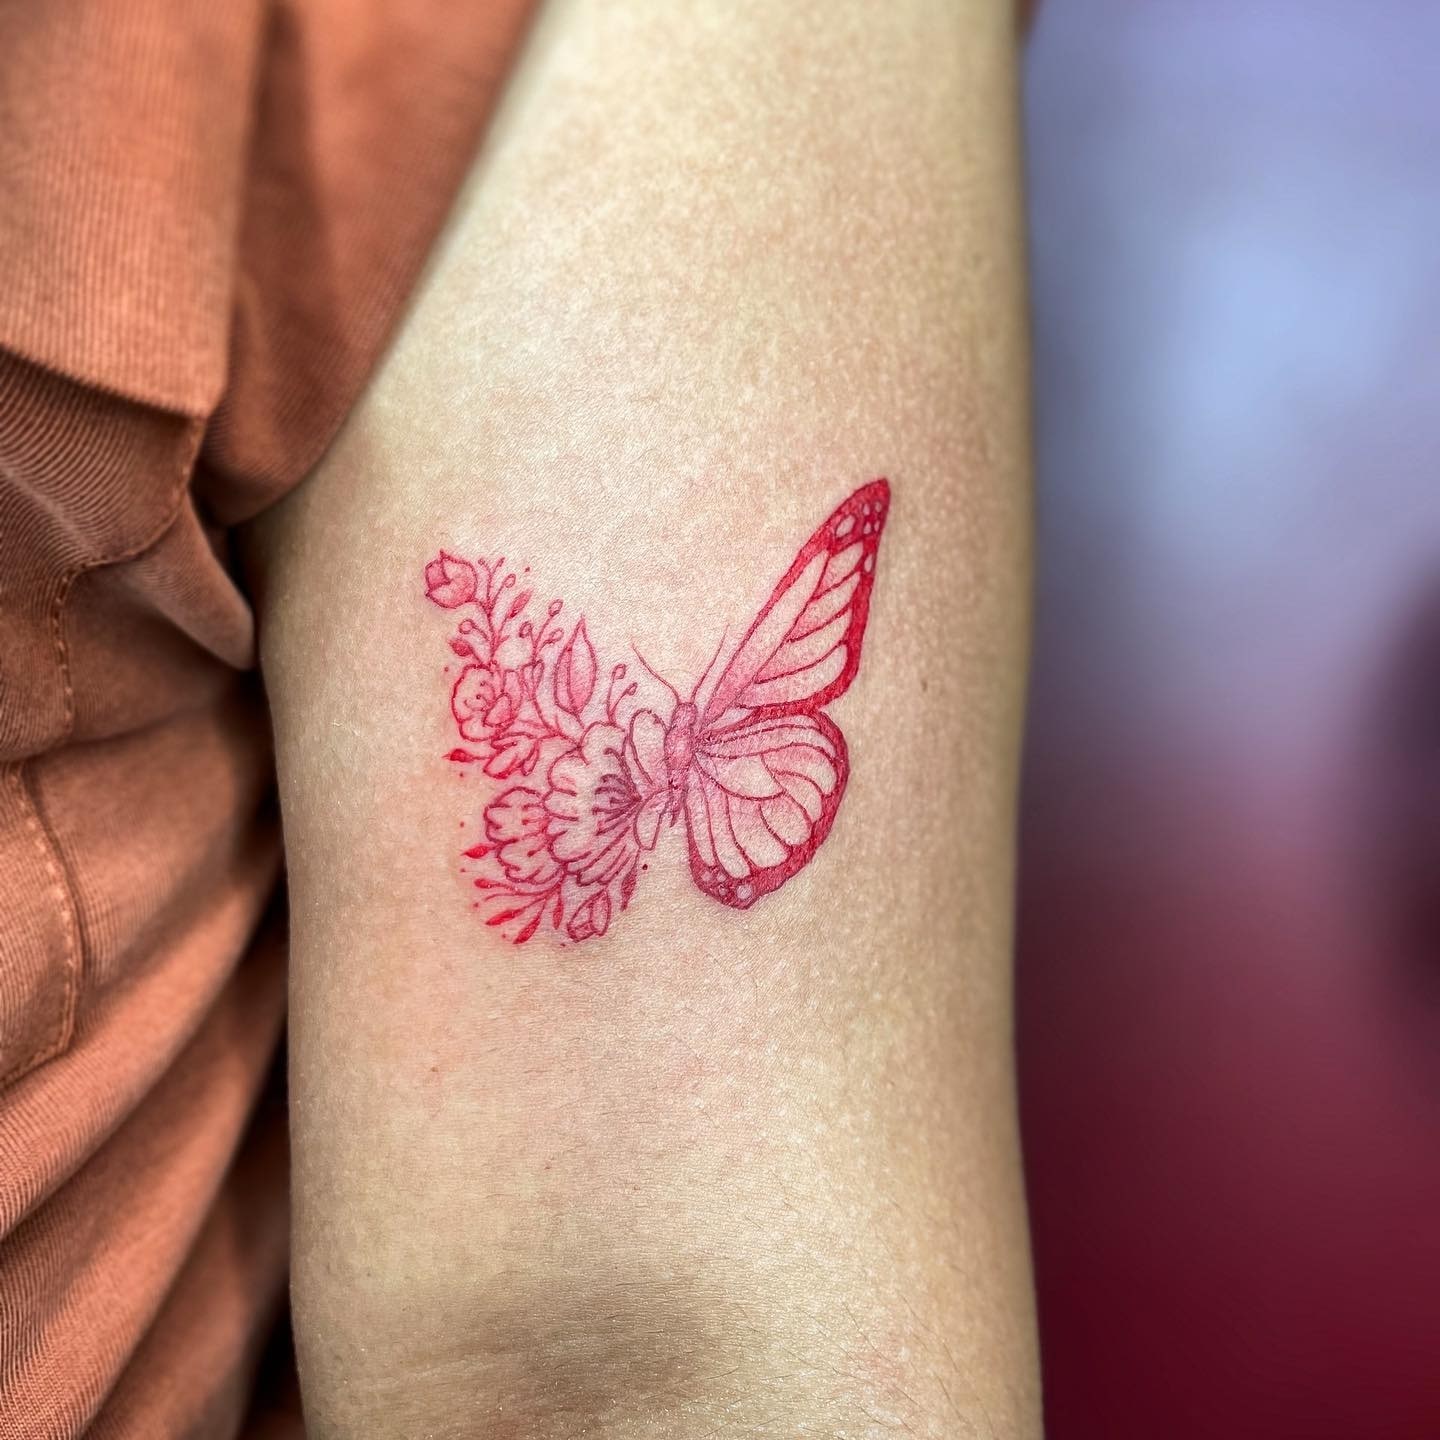 Butterfly and flowers tattoo